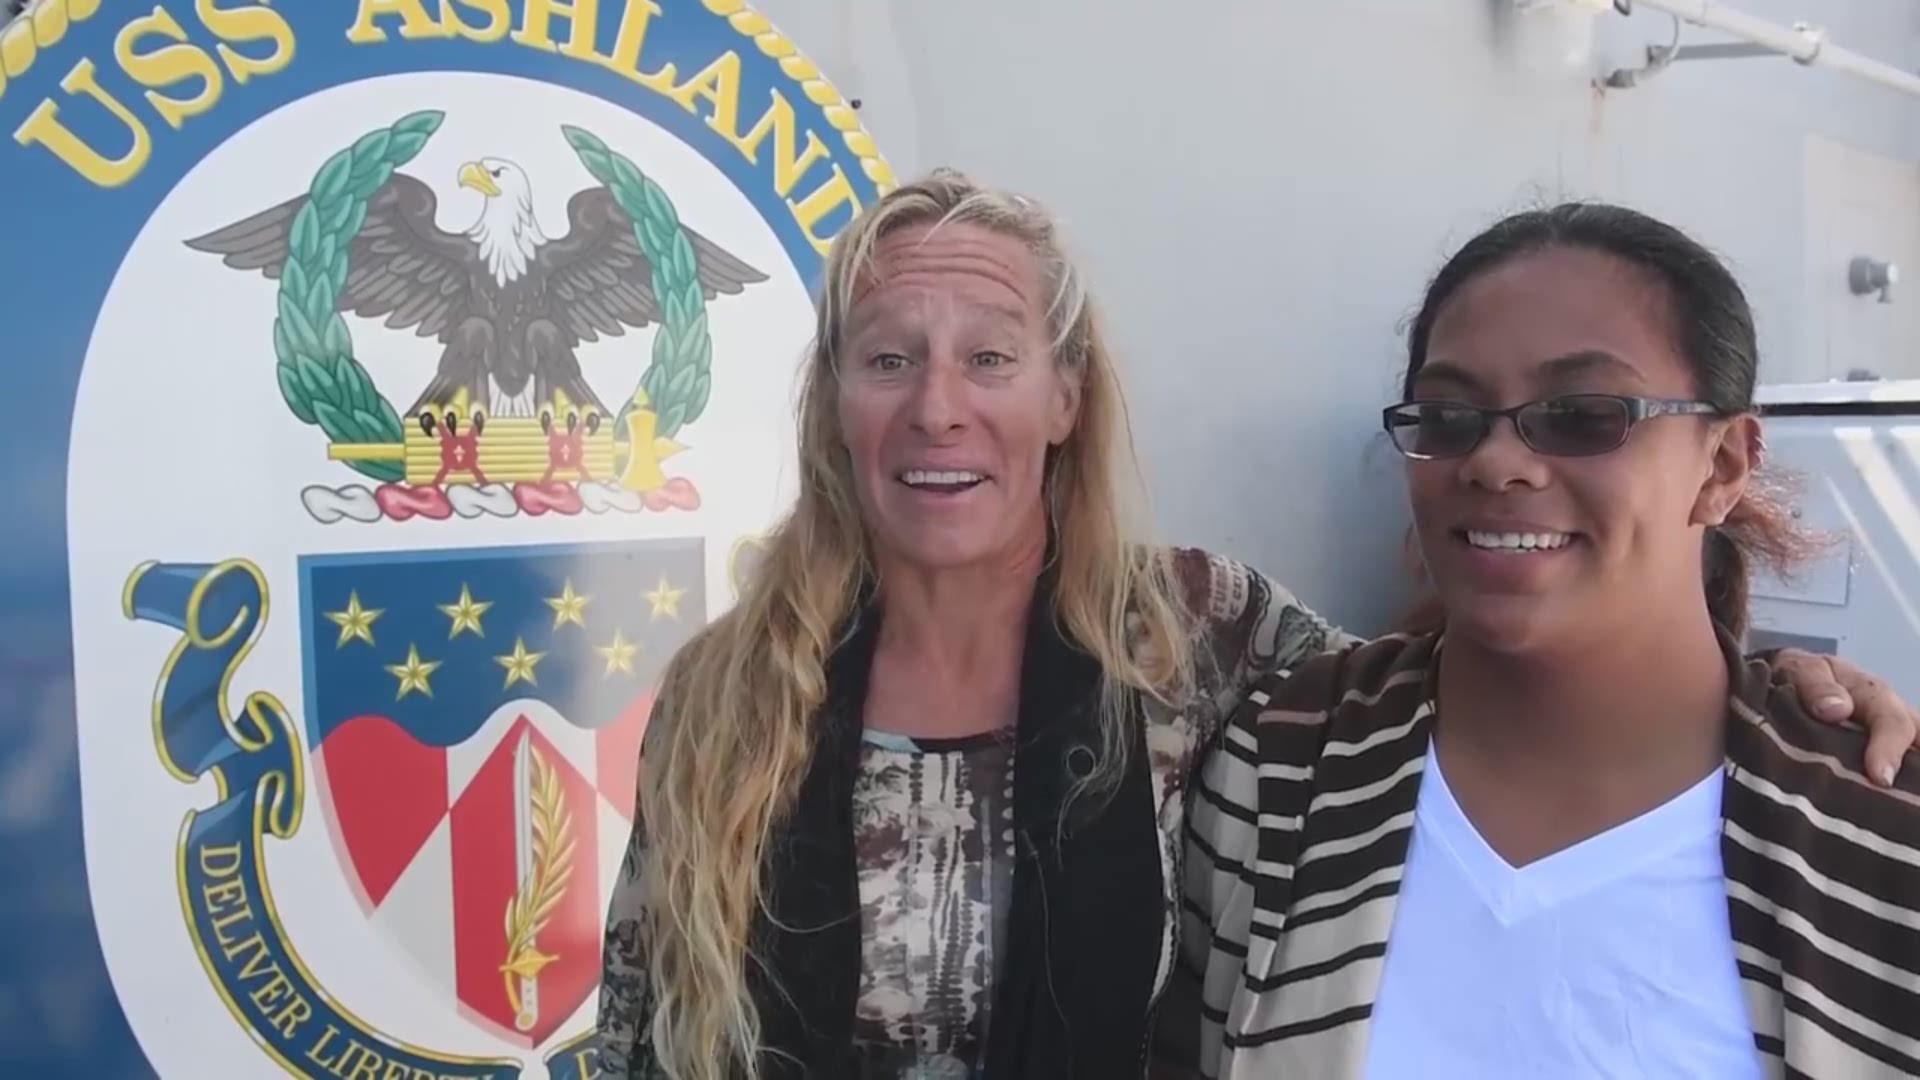 Americans Tasha Fuiava and Jennifer Appel detail their experience surviving at sea in the Pacific Ocean for five months and rescued by the USS Ashland. (U.S. Navy Video)